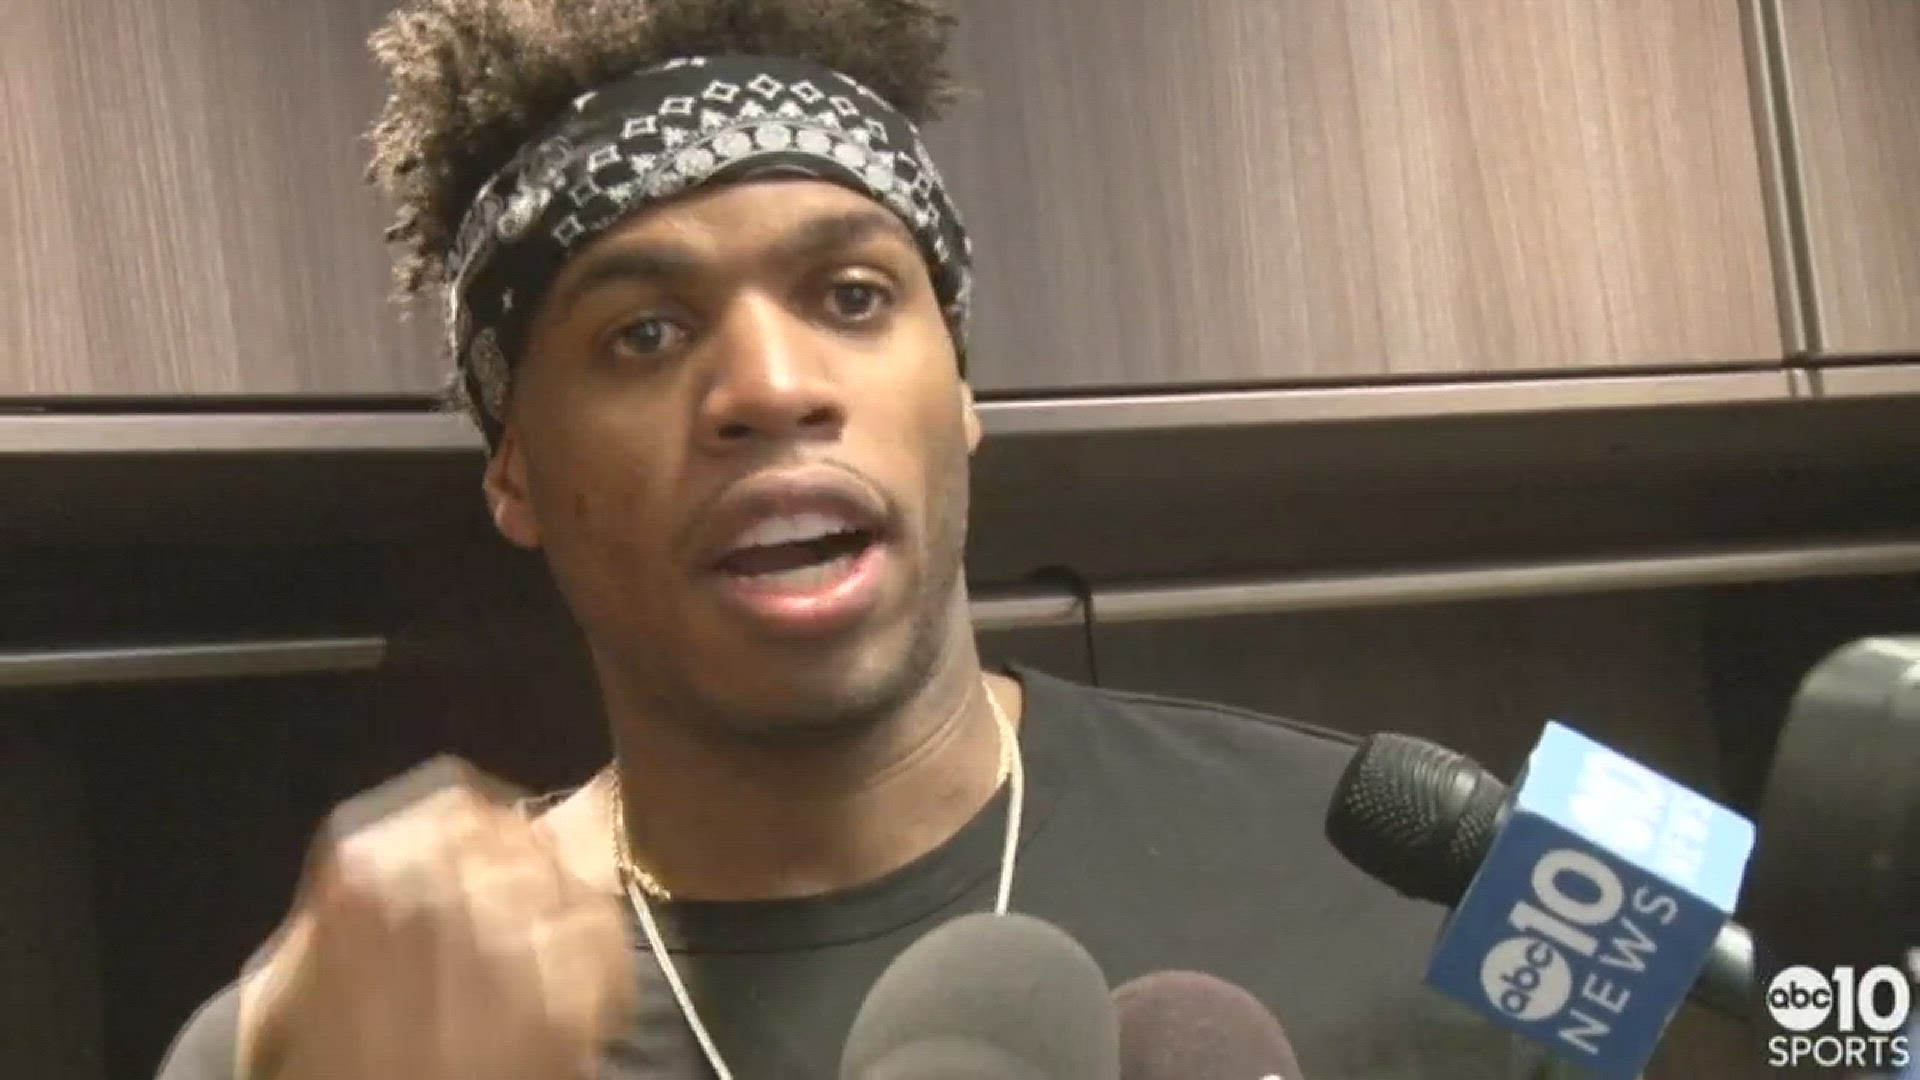 Kings guard Buddy Hield talks about the team's win in Sacramento over the Oklahoma City Thunder on Tuesday, and finding his shooting stroke again.